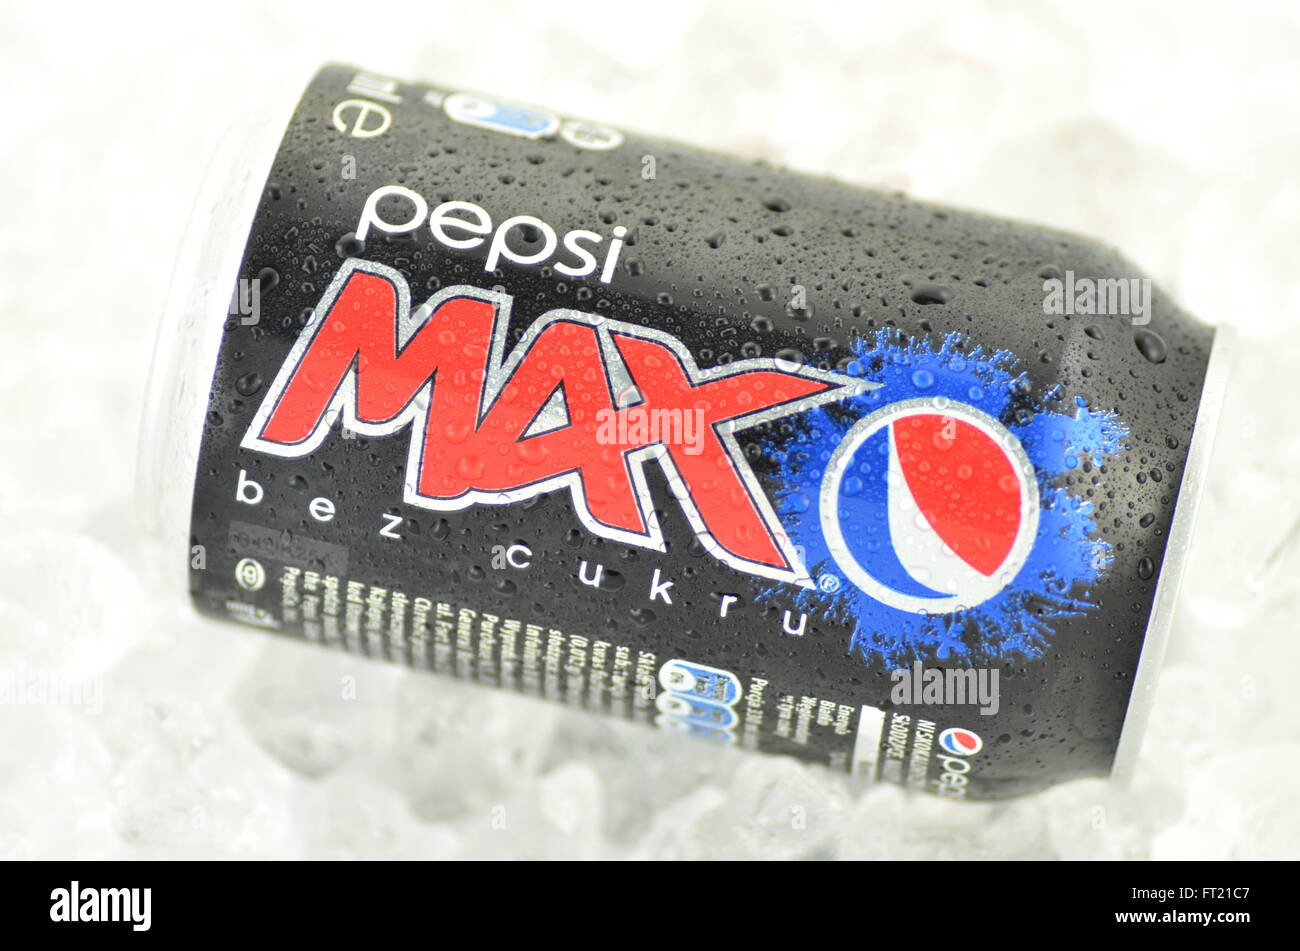 Can of Pepsi Max drink on ice Stock Photo